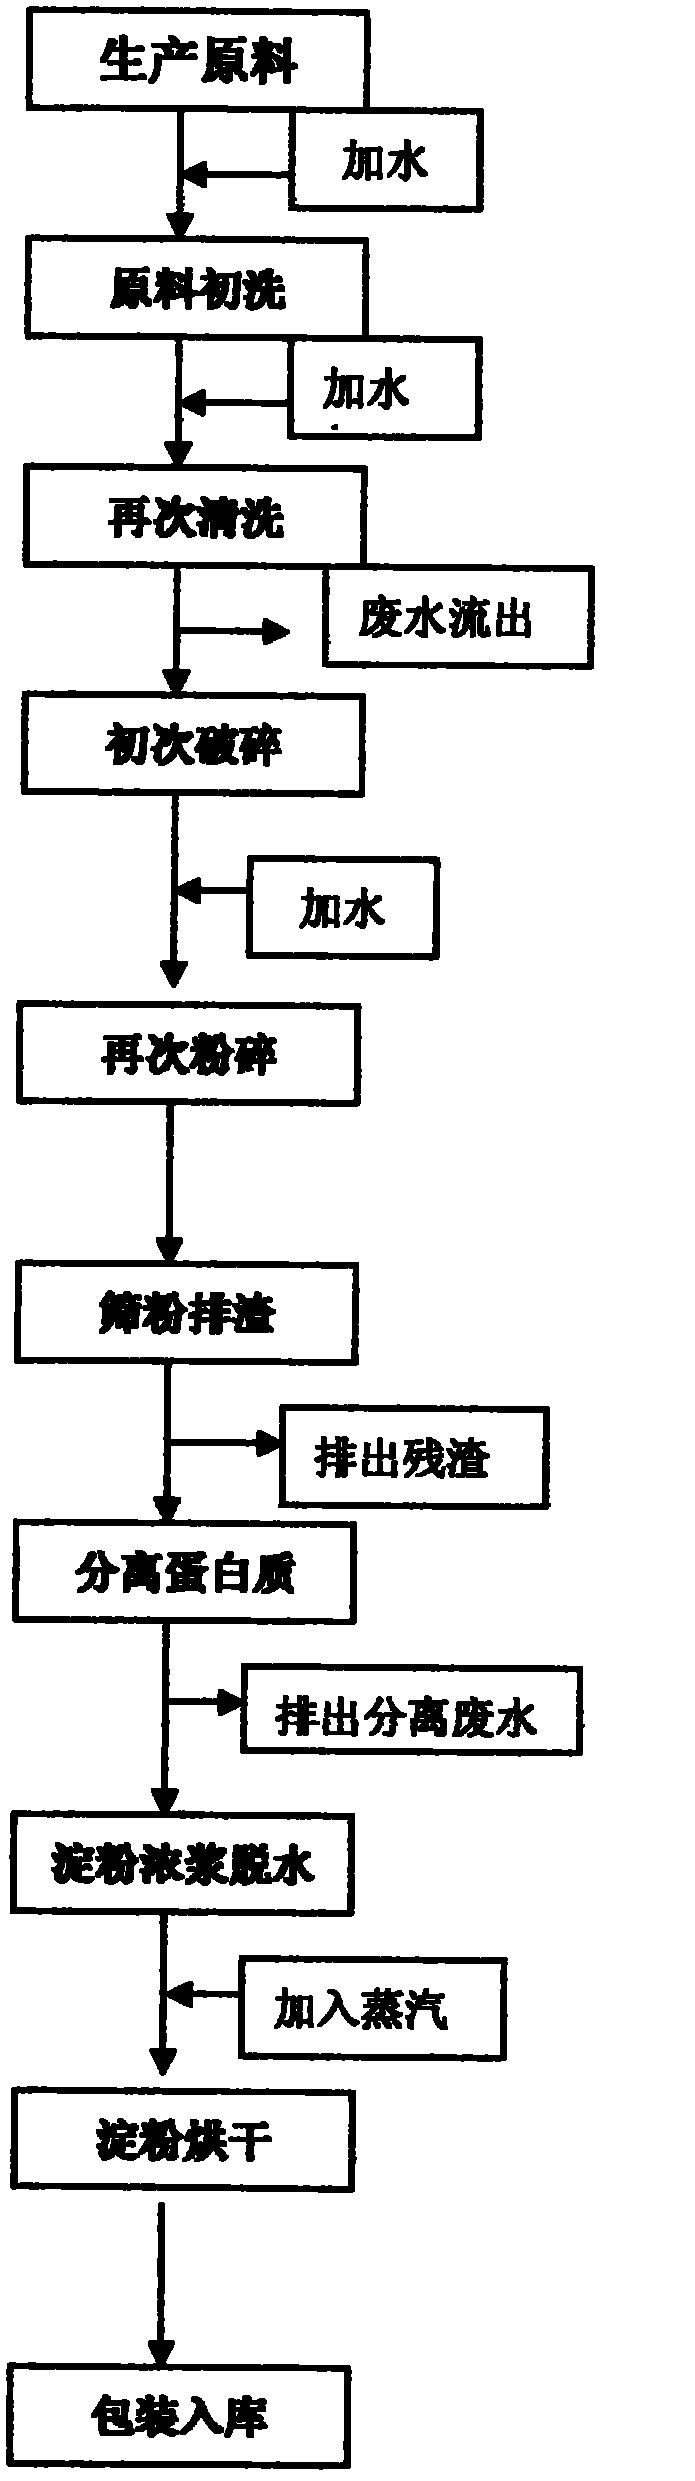 Process method for synchronously producing pueraria starch and pueraria flavonoid